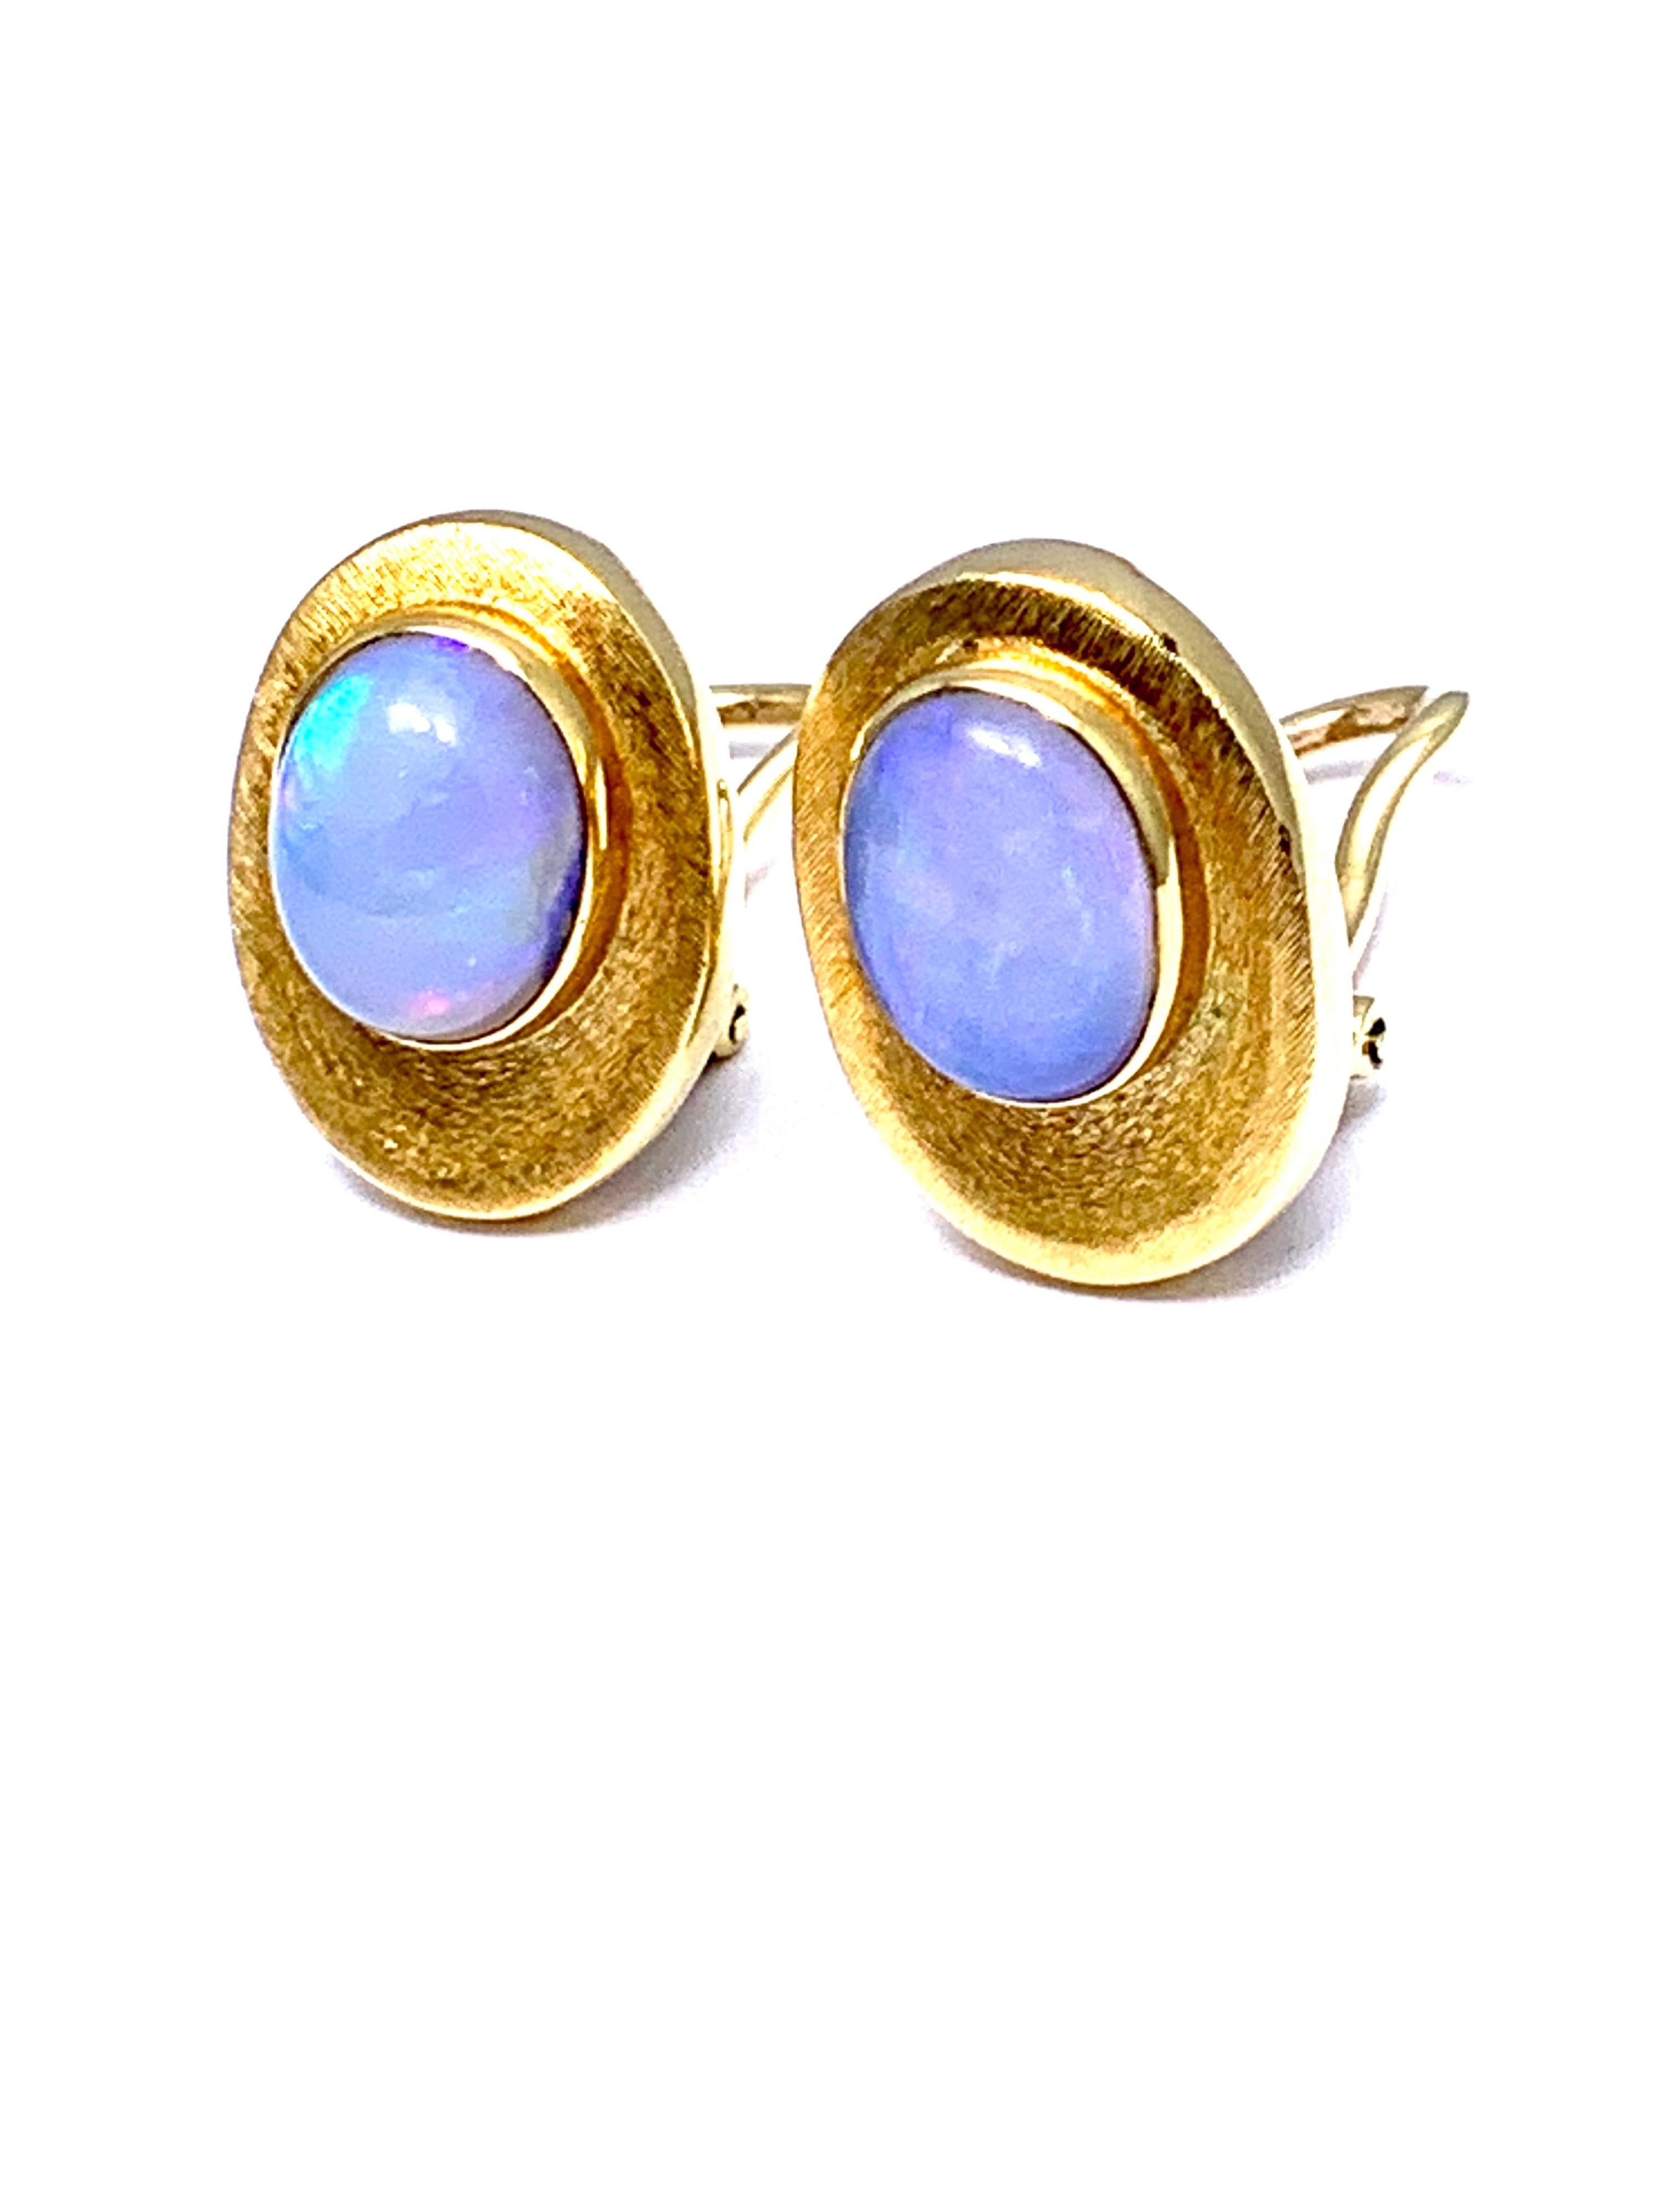 A wonderful pair of cabochon Opal clip earrings designed by Bruno Guidi.  The 3.65 carat opal display a bluish hue and have great play of color throughout.  They are bezel set in an 18k yellow gold oval frame with a brushed finish.  The earrings are